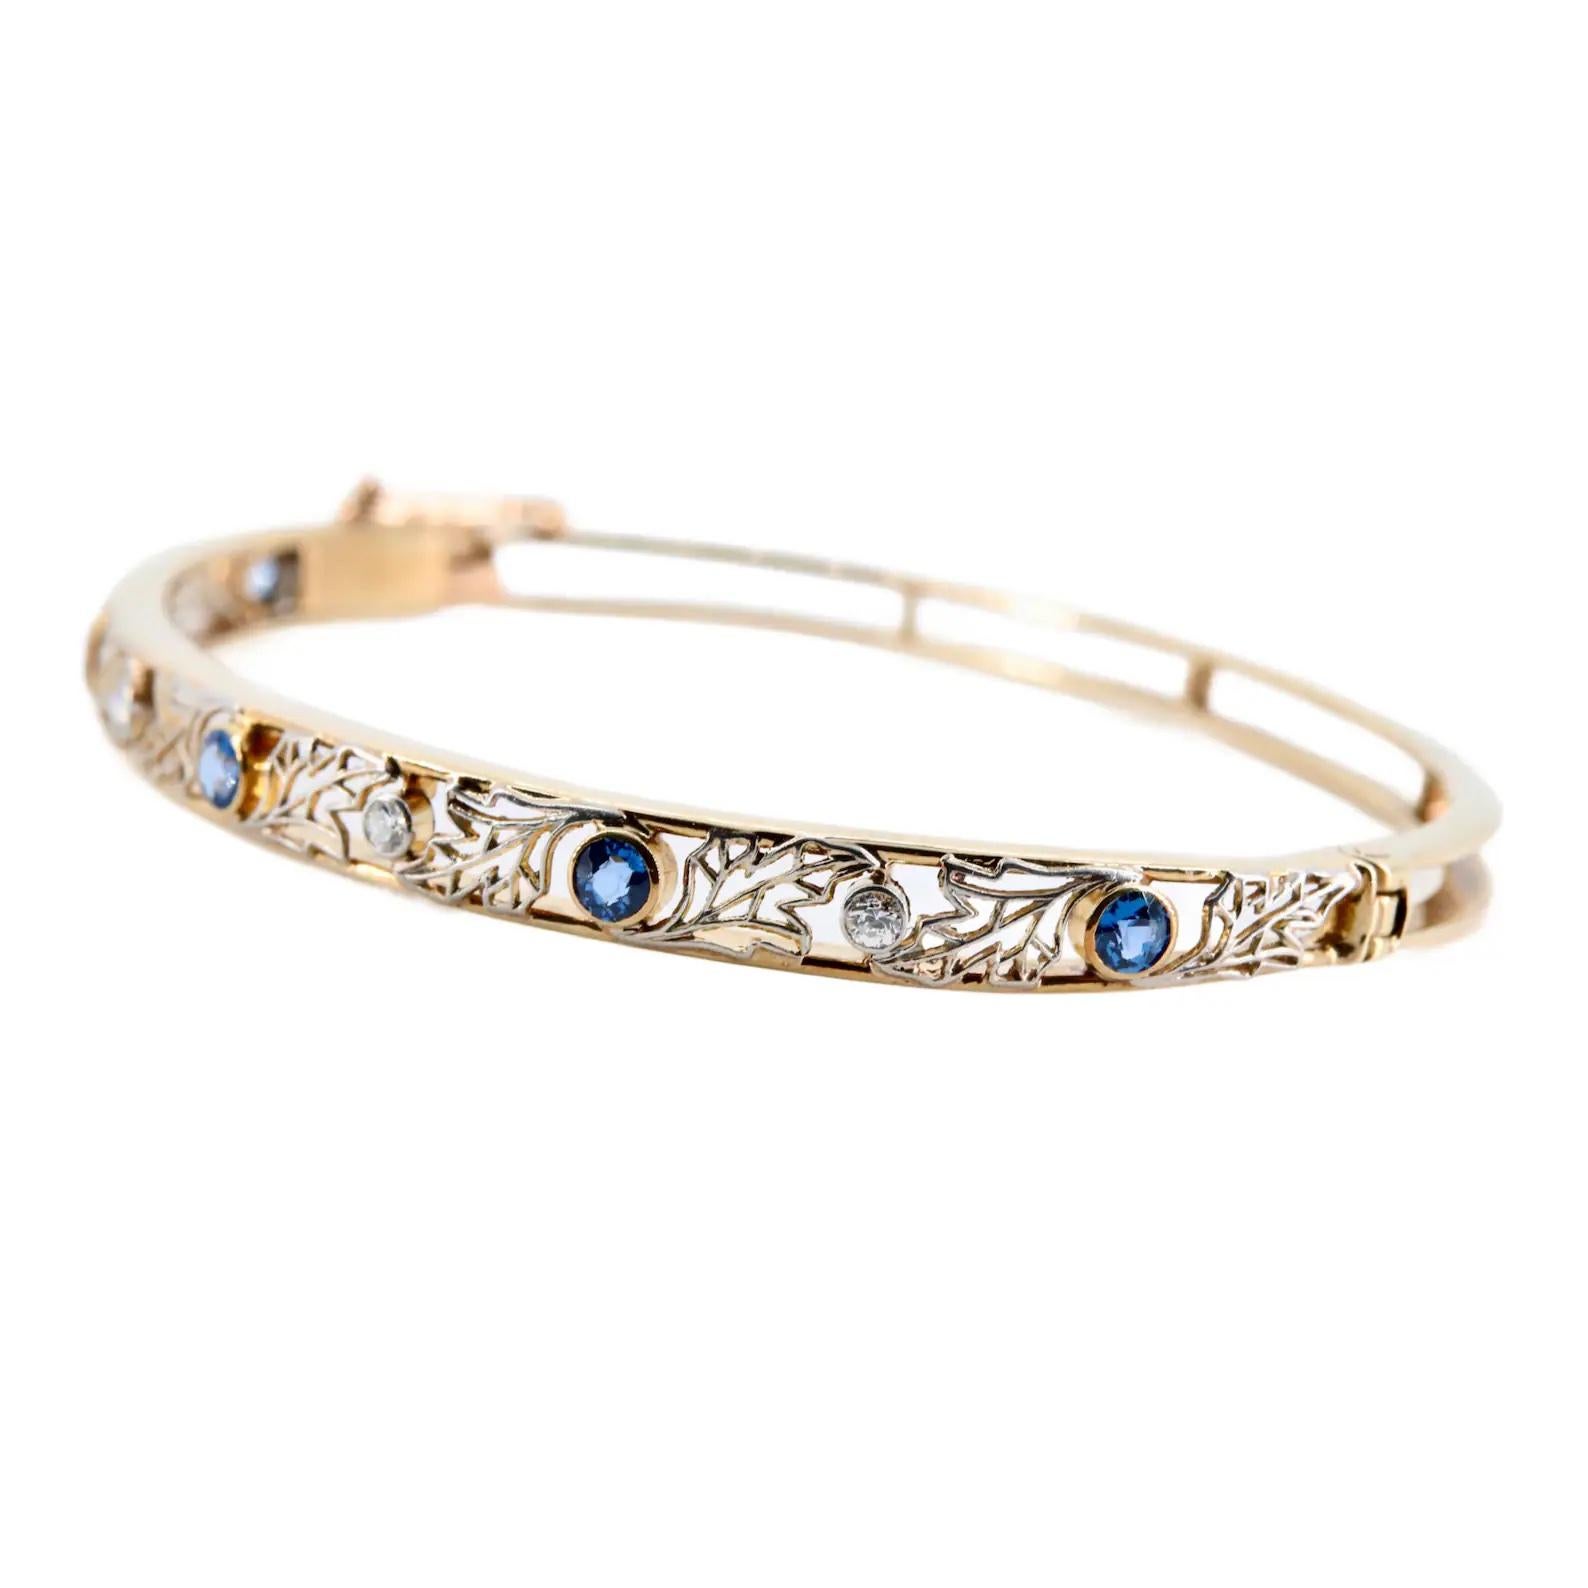 An art nouveau period platinum filigree leaf motif bangle bracelet. Set with five no heat Yogo Gulch, Montana sapphires of 0.25 carats a piece for a total sapphire weight of 1.25 carats. Accented by 0.16ctw of bezel set old European cut diamonds of